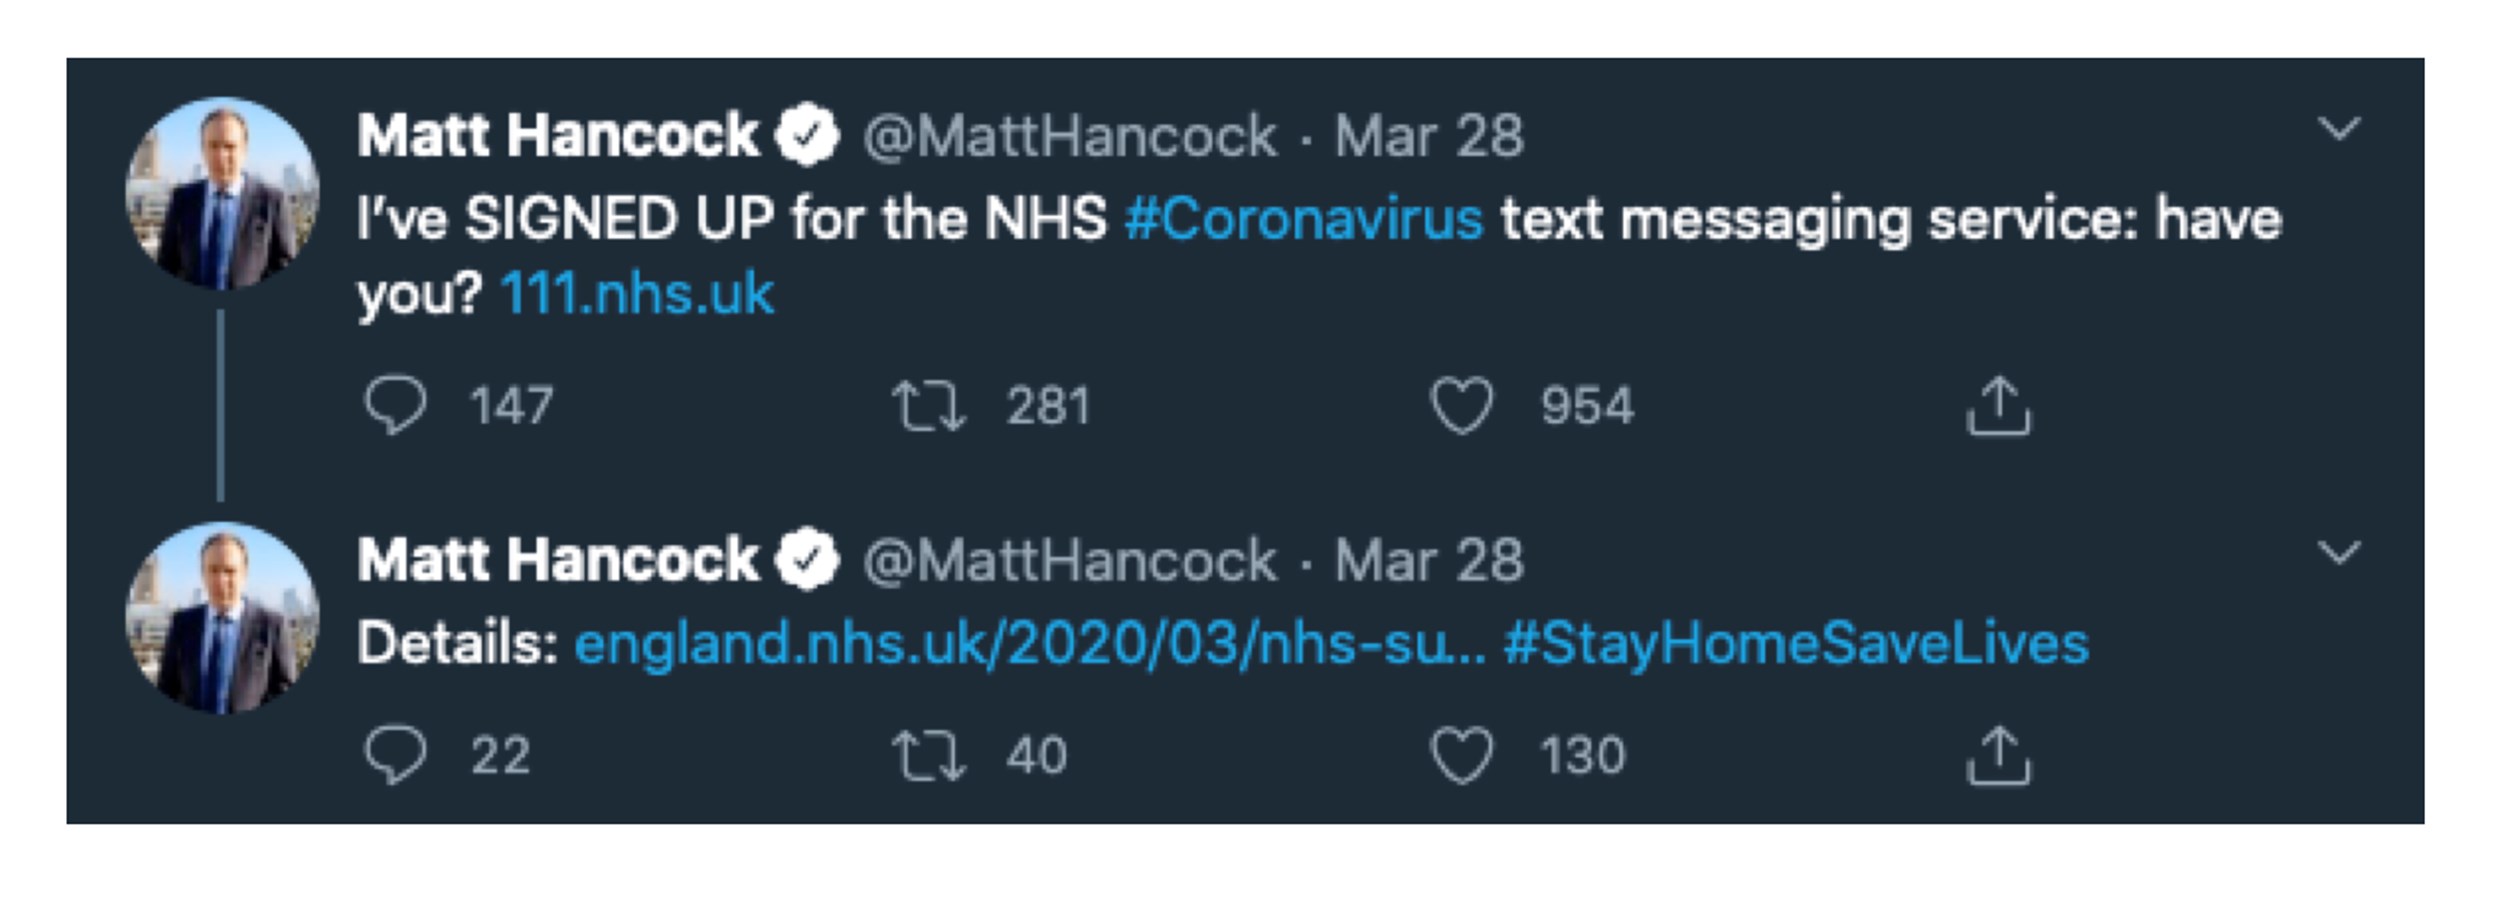 Tweet about NHS COIV-19 texting service